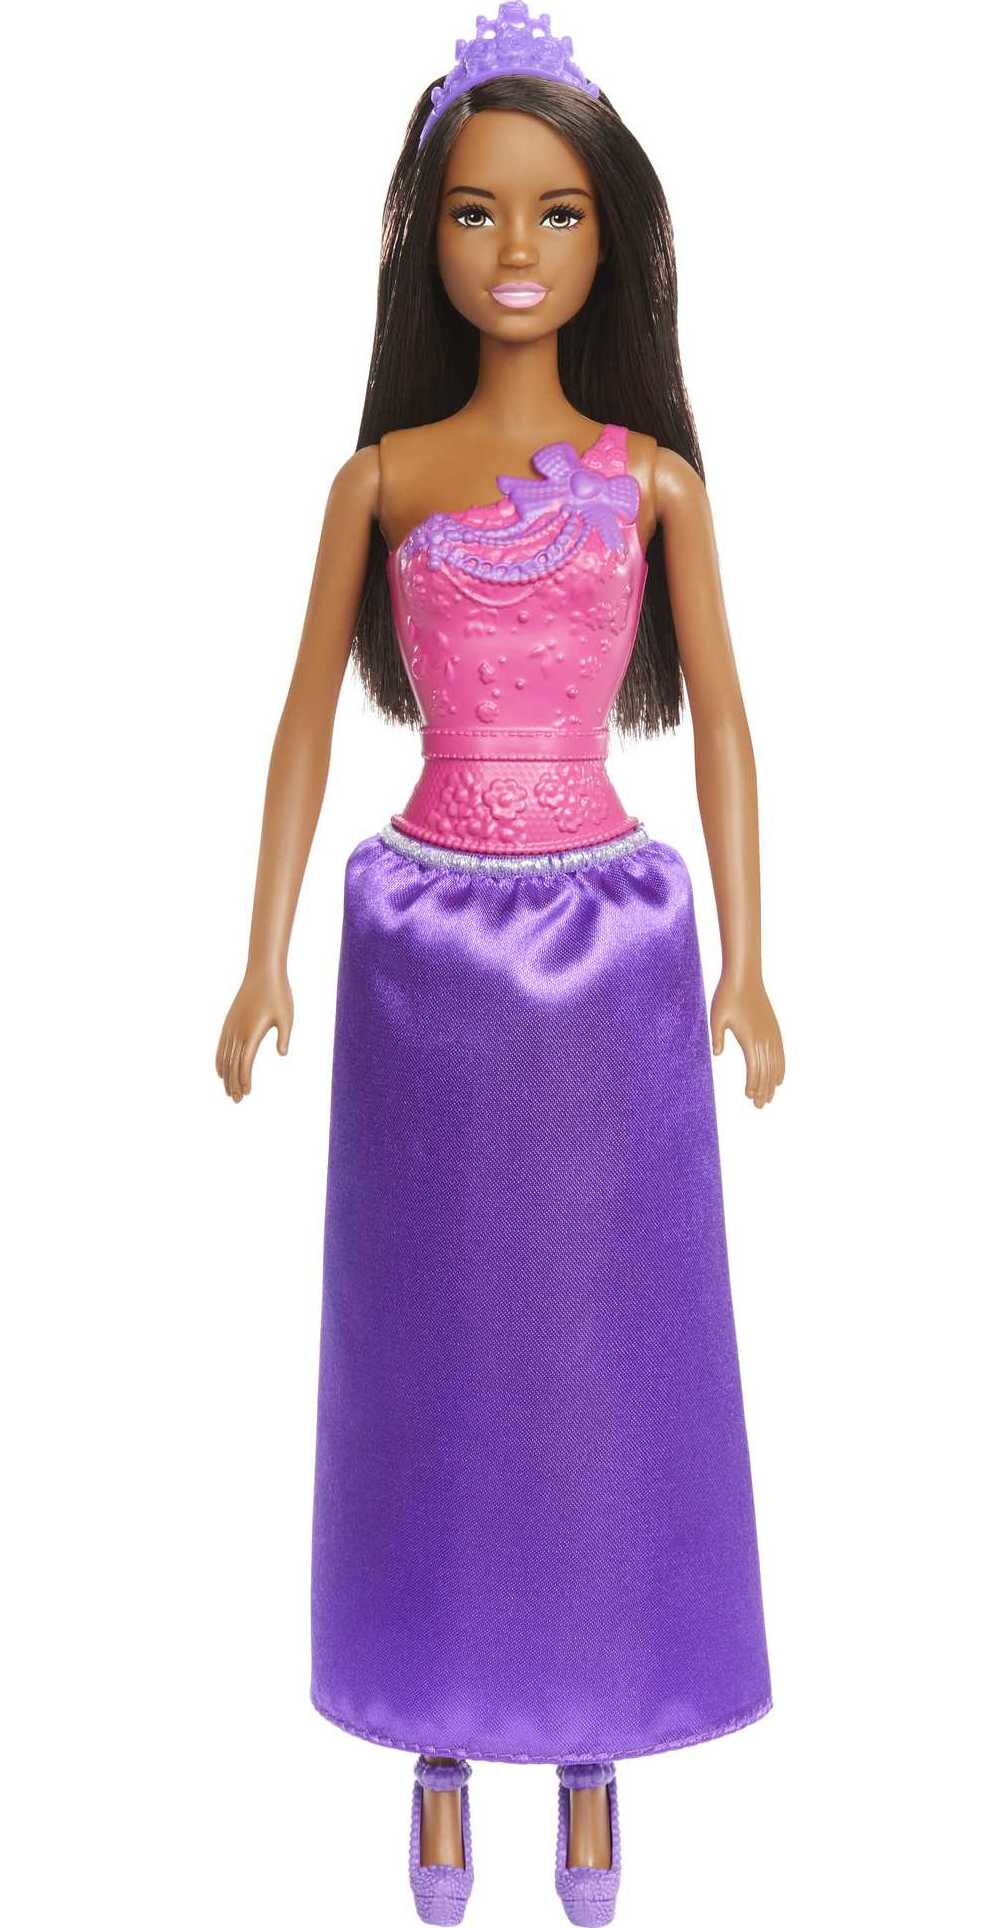 Barbie Dreamtopia Royal Doll, Royal Brunette with Purple Removable Skirt & Accessories - image 1 of 6